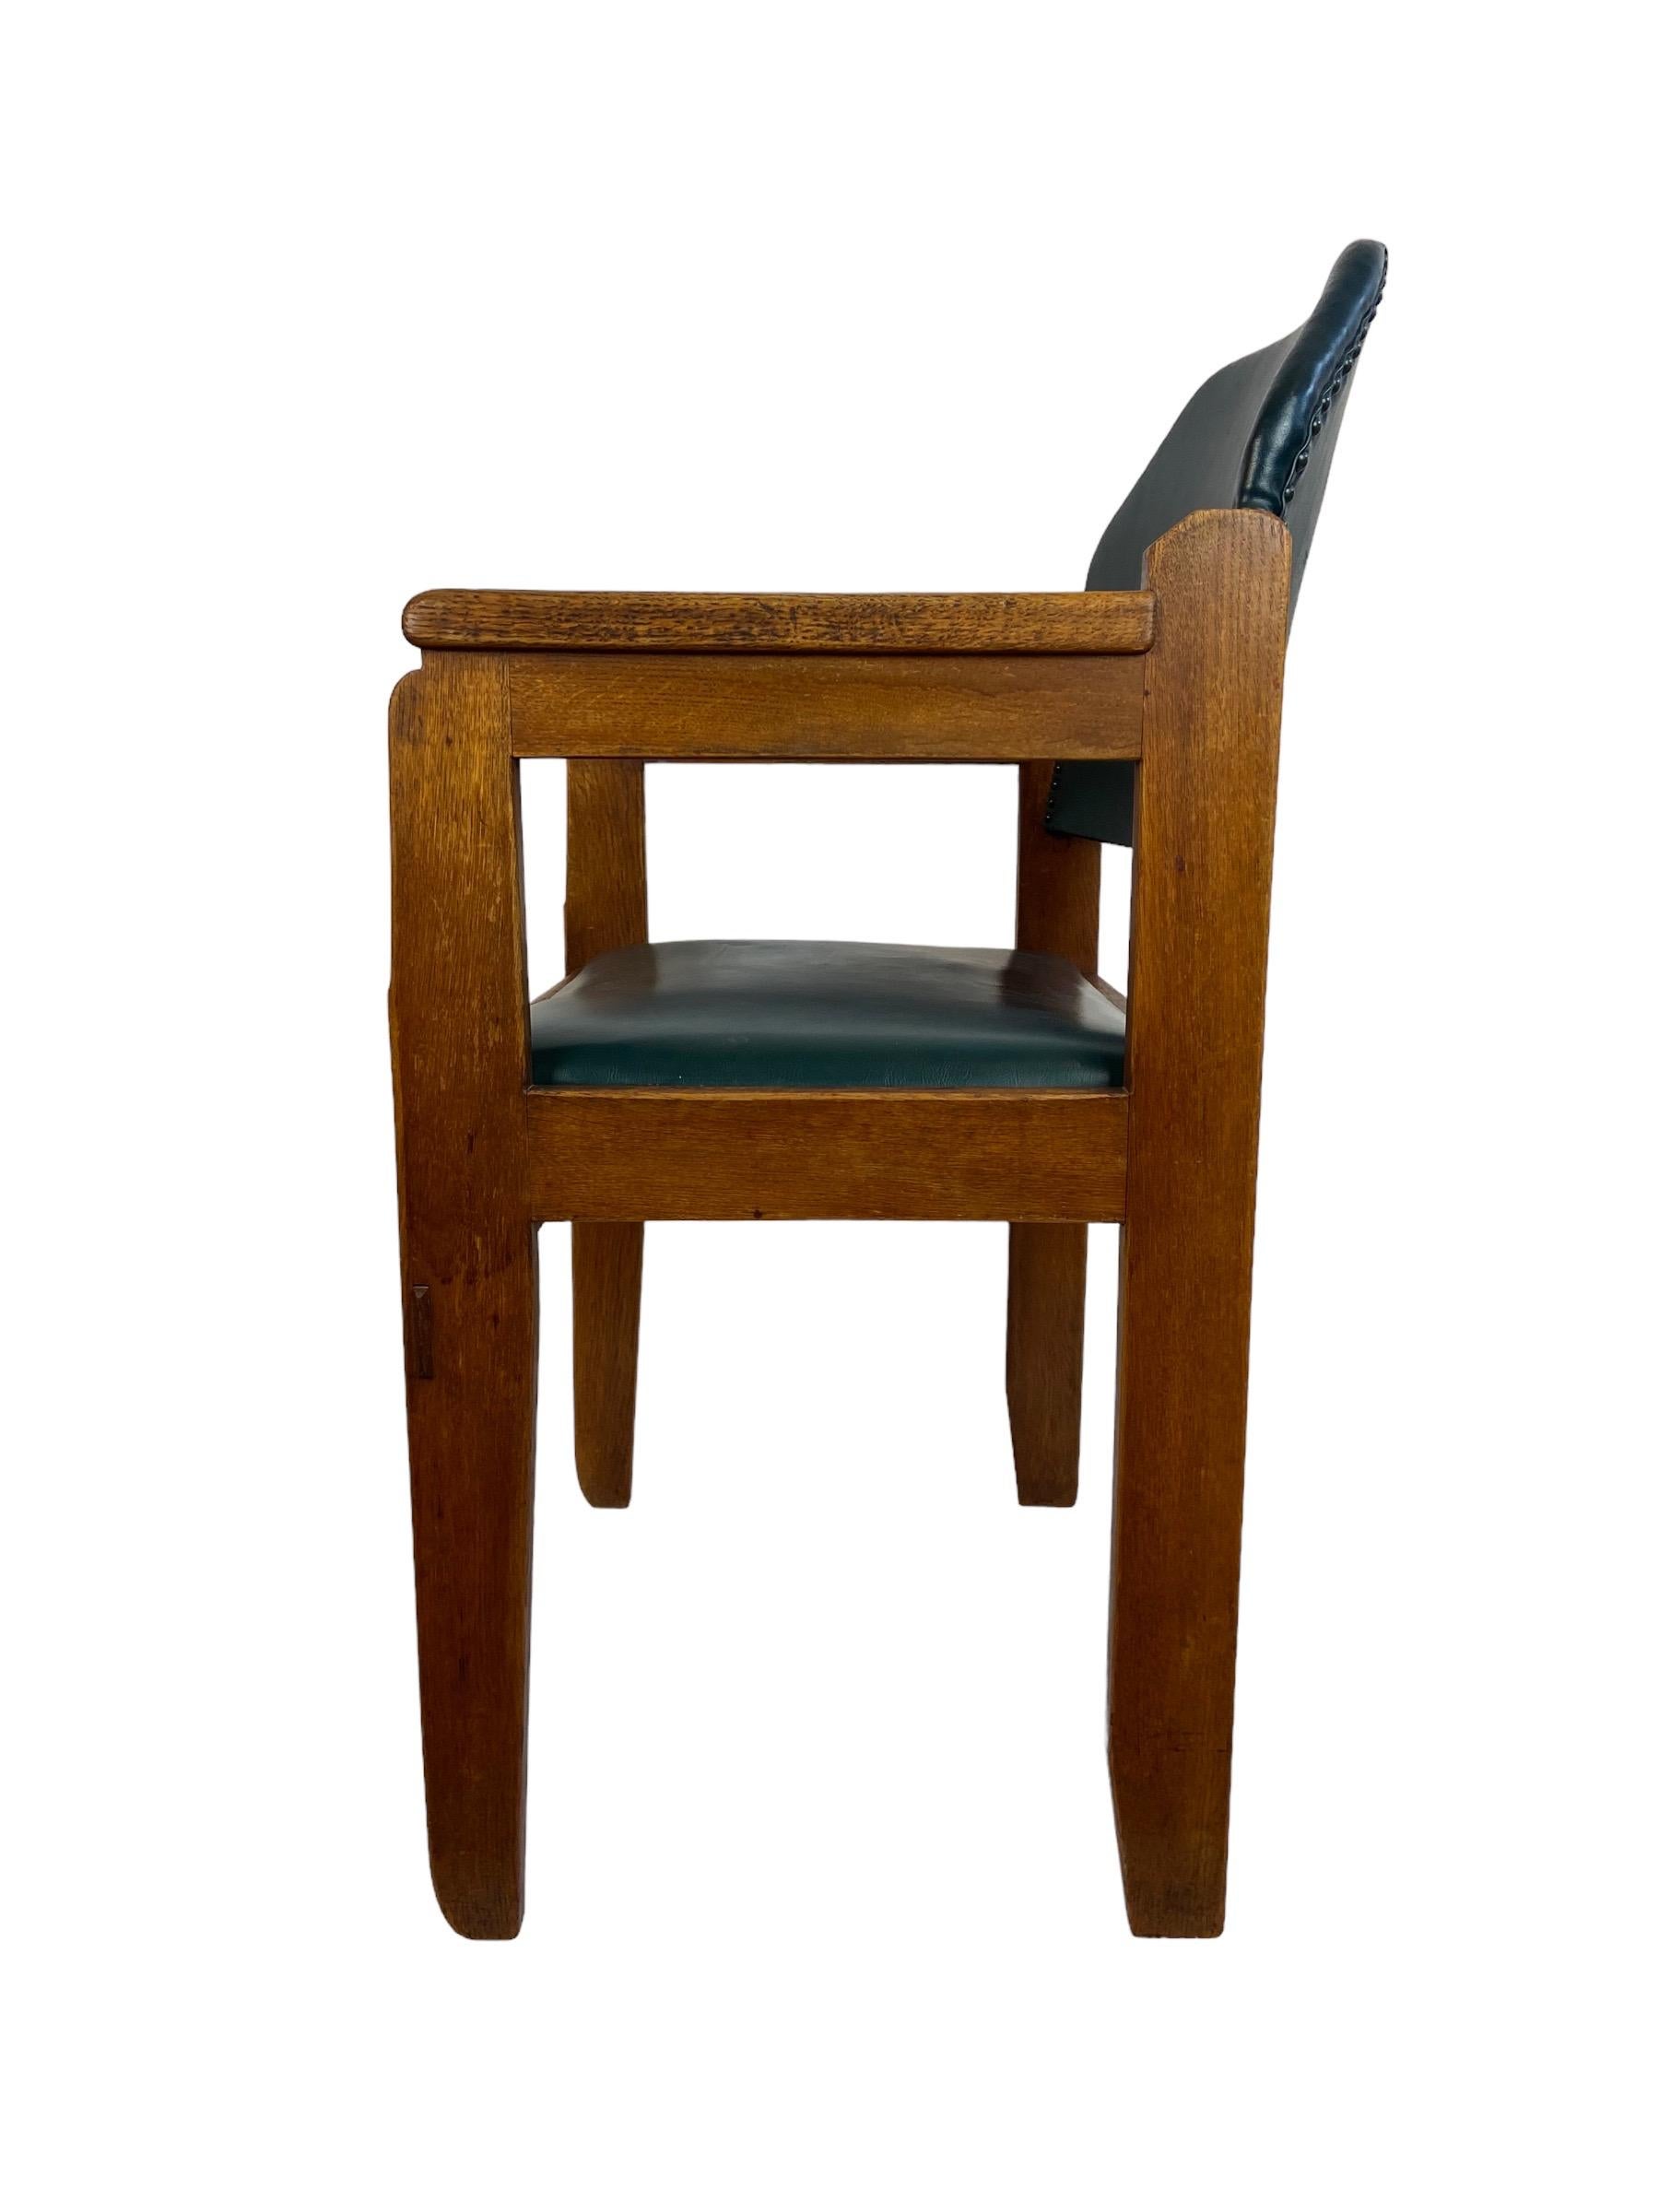 Amsterdam School armchair from the company J.A. Huizinga, made in the 1920s in The Netherlands. As you can see in the photo the seat shows small damages. Made of oak wood and with manufacturers plate.

Seat height 49 cm armrest height 71 cm height